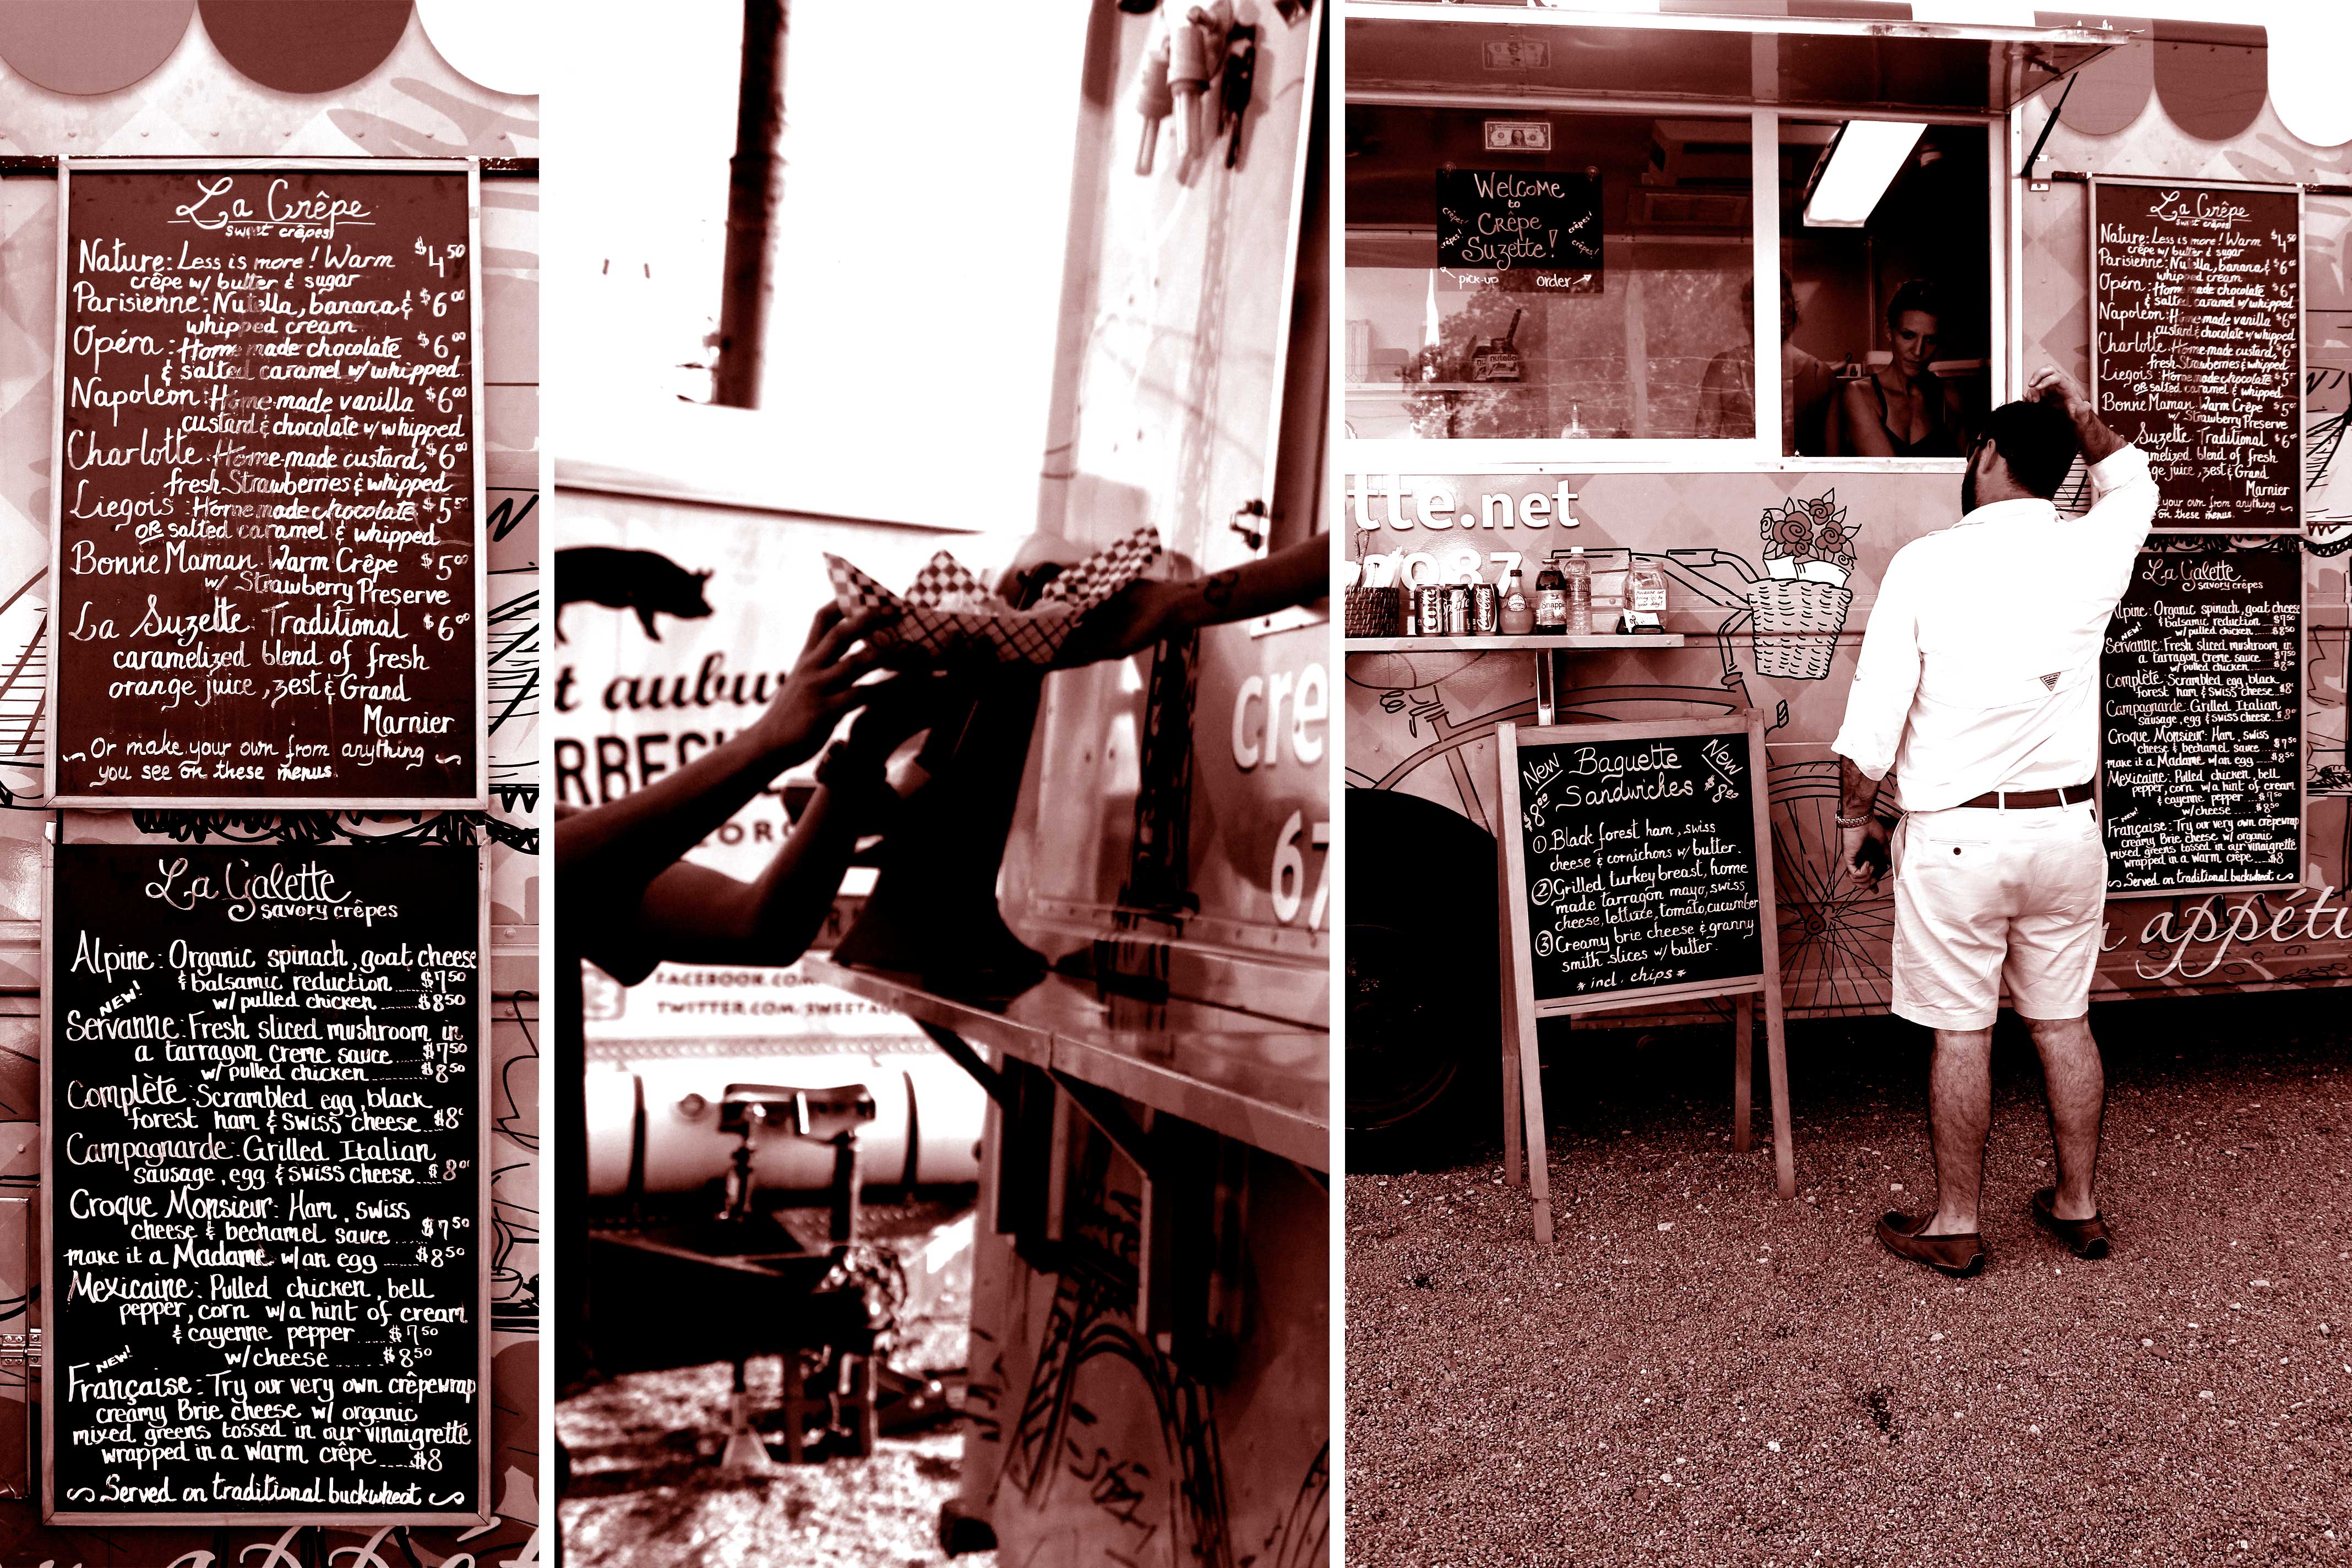 Collage of patrons ordering and receiving crepes from the Crepe Suzette food truck at Atlanta Food Truck Park and Market.